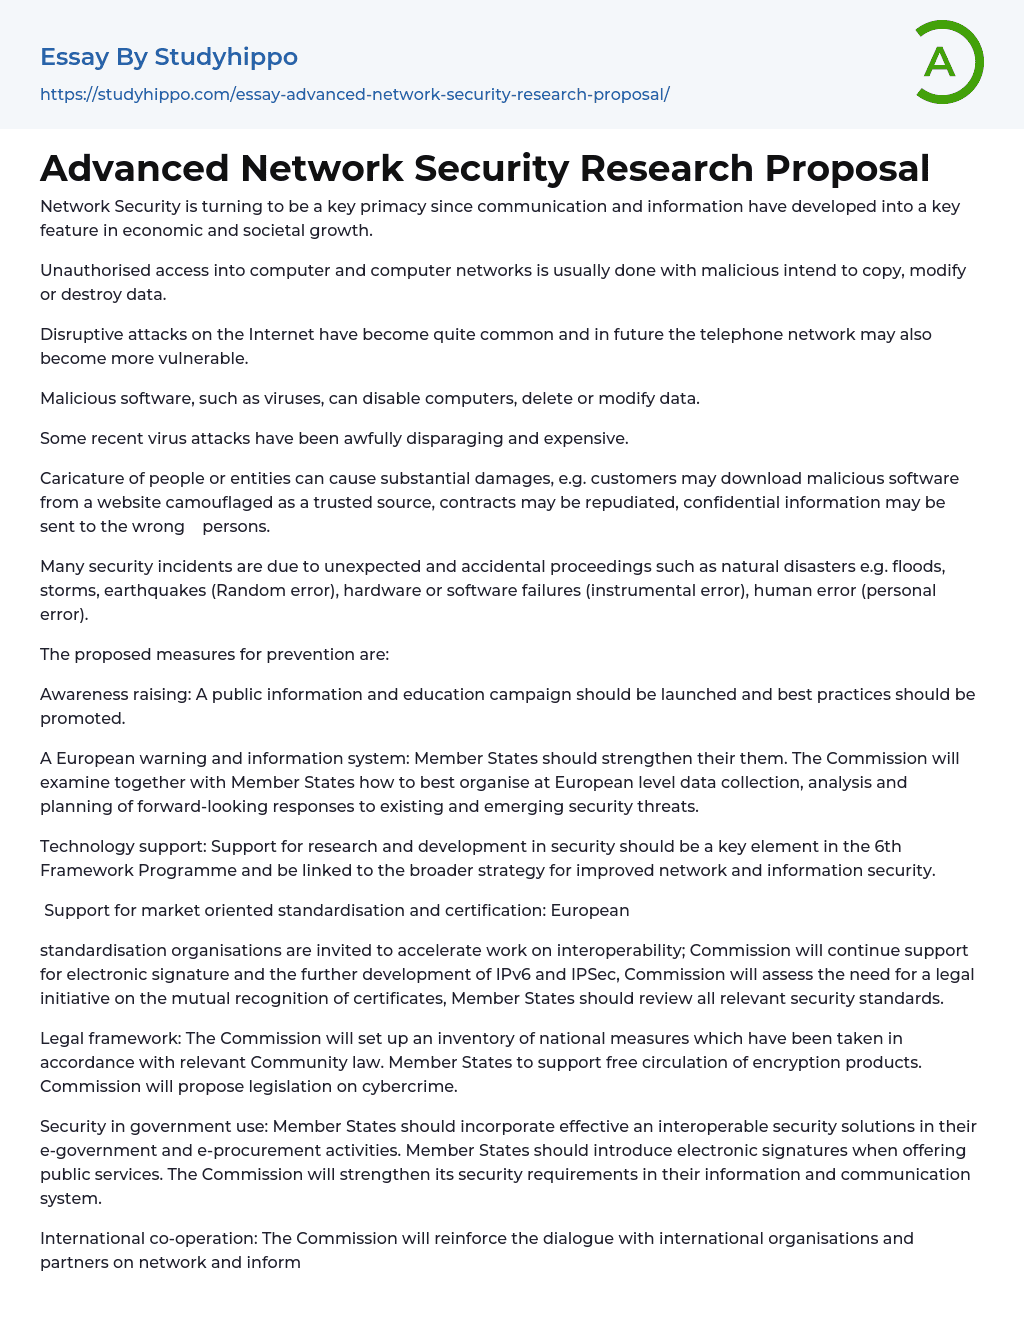 Advanced Network Security Research Proposal Essay Example